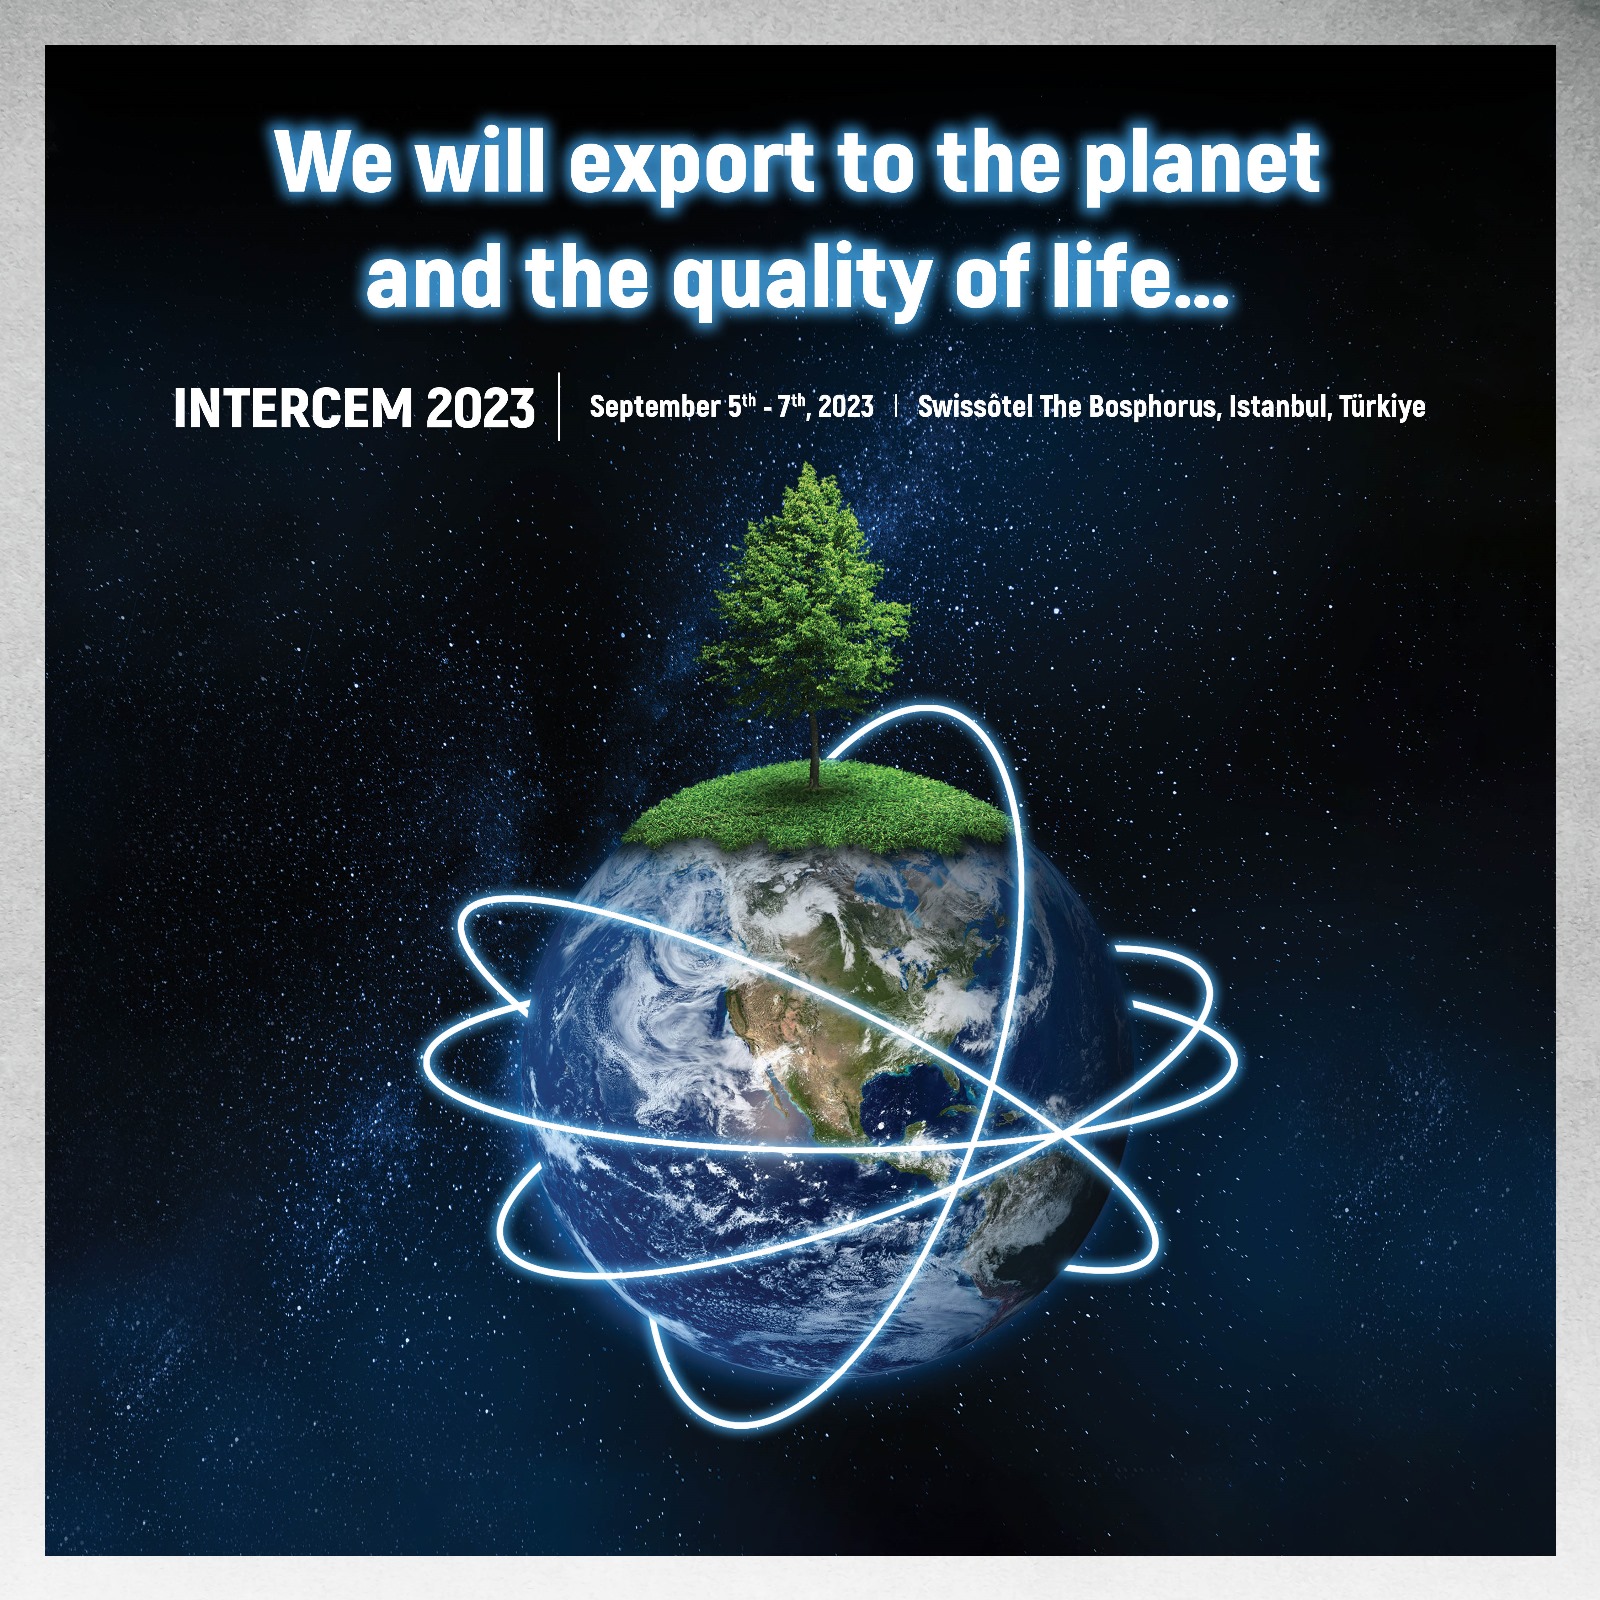  We will export to the planet and the quality of life at INTERCEM